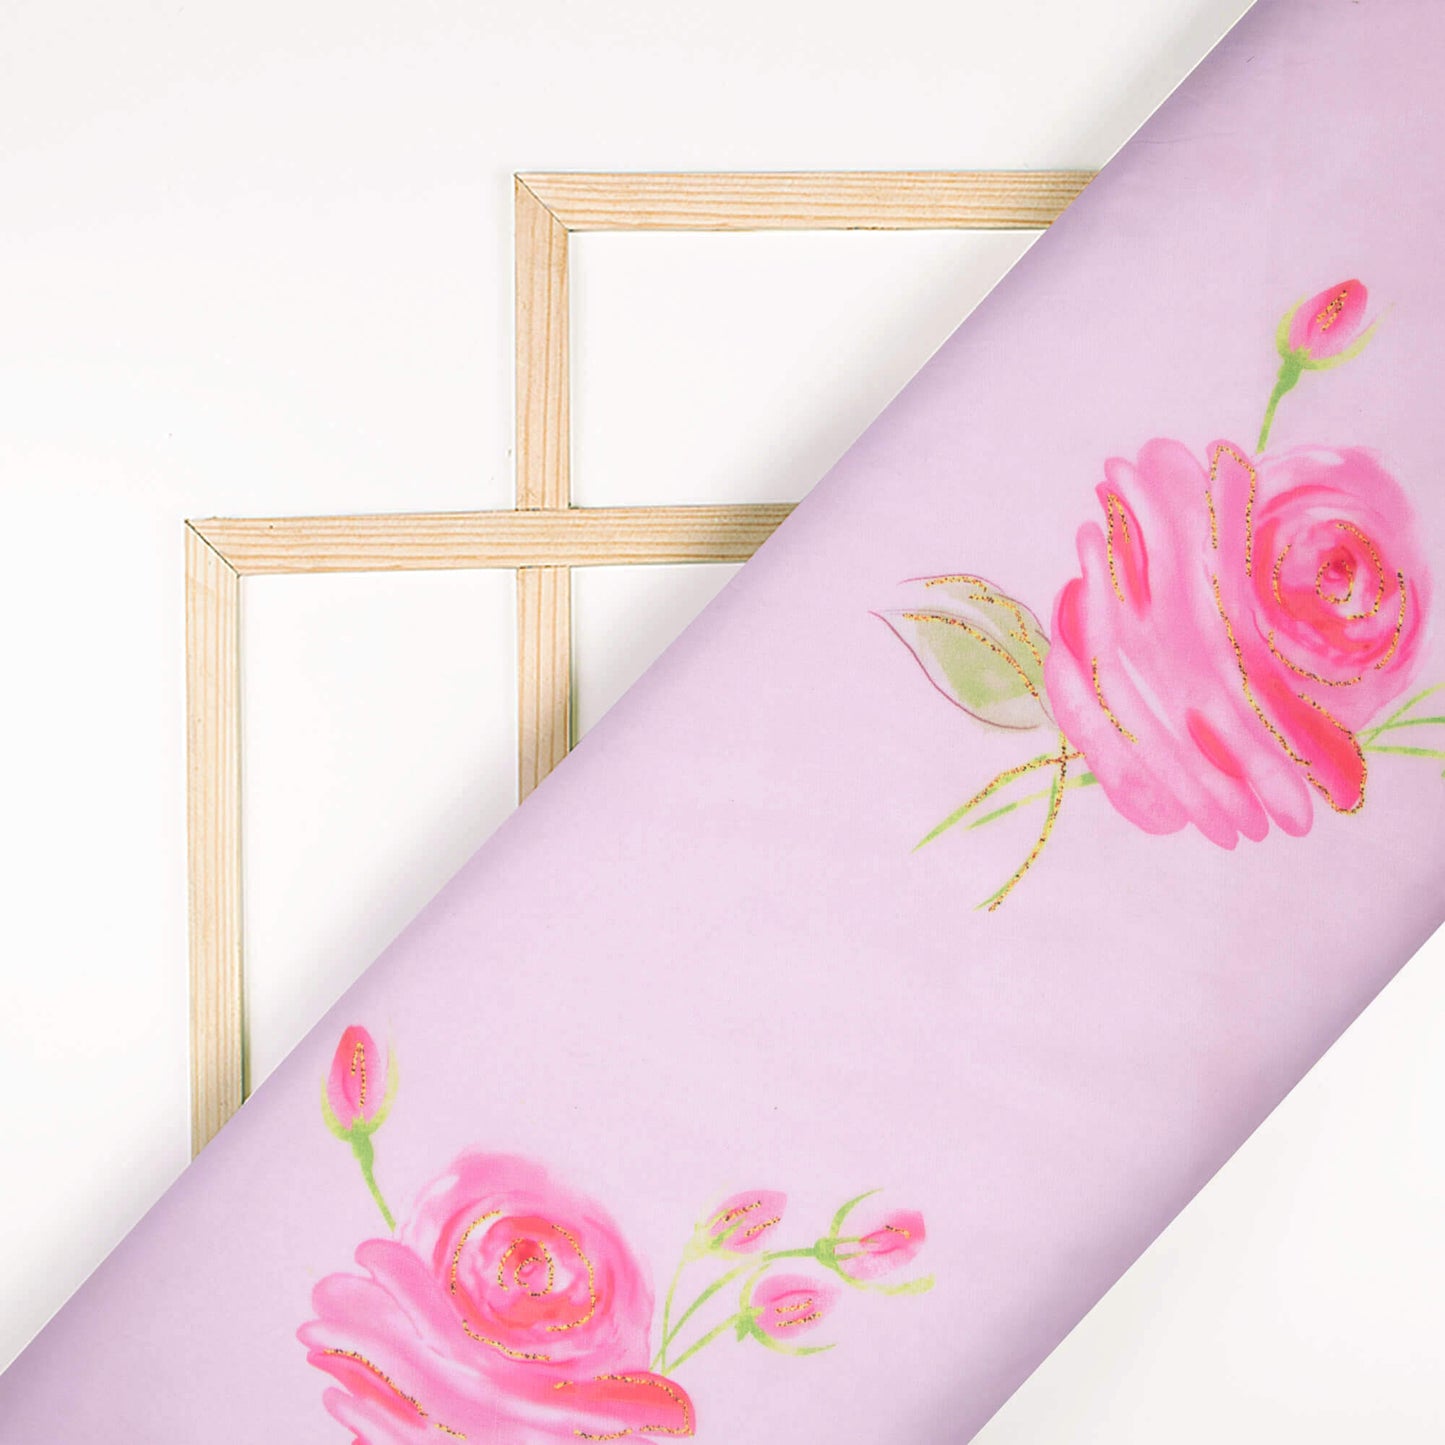 Pale Pink And Rose Pink Floral Pattern Hand Paint Effect Digital Print Organza Satin Fabric